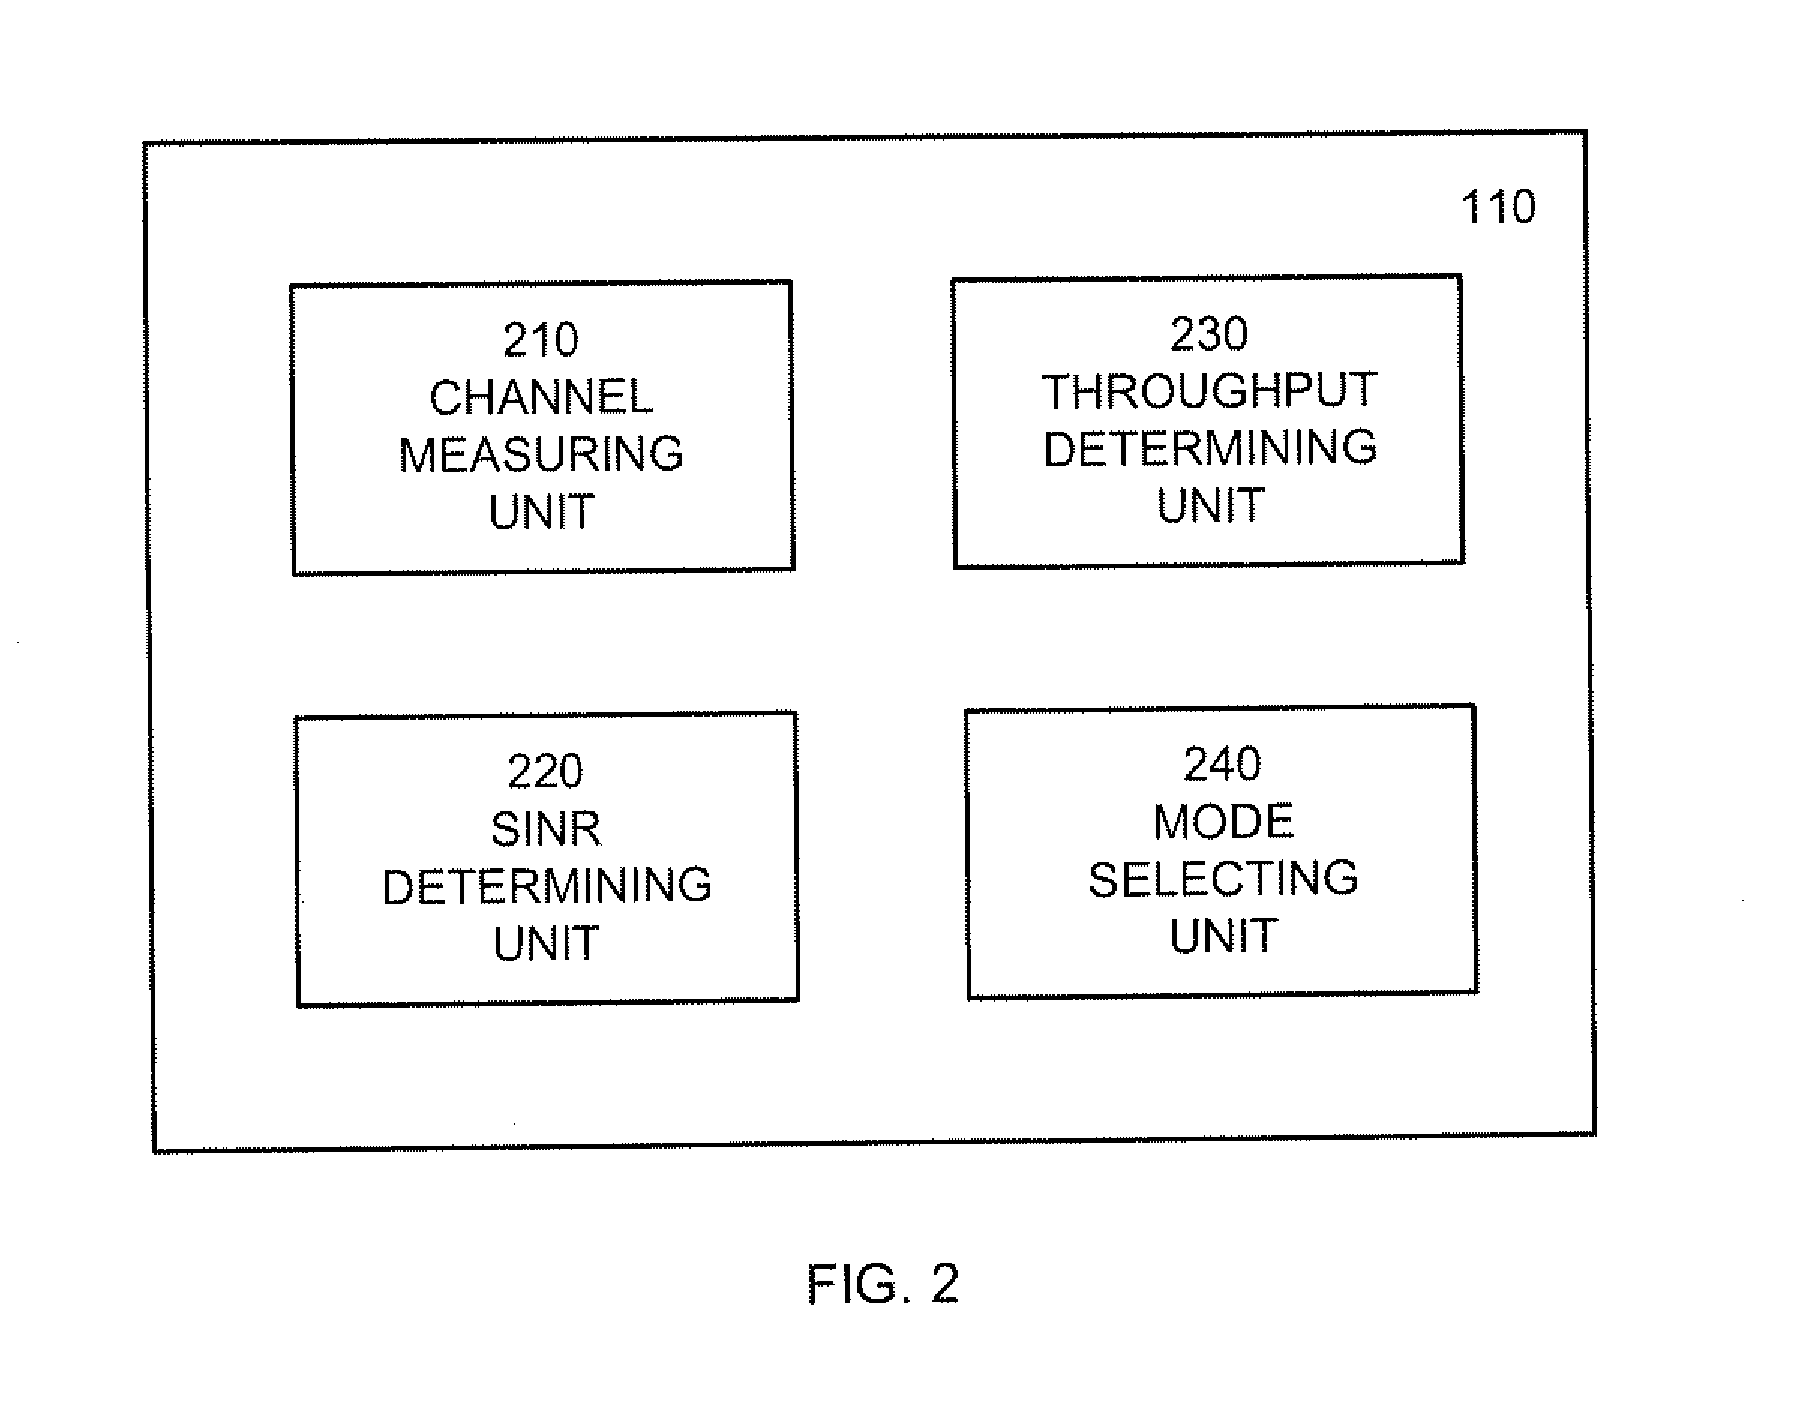 Transmission mode adaptation in a wireless network